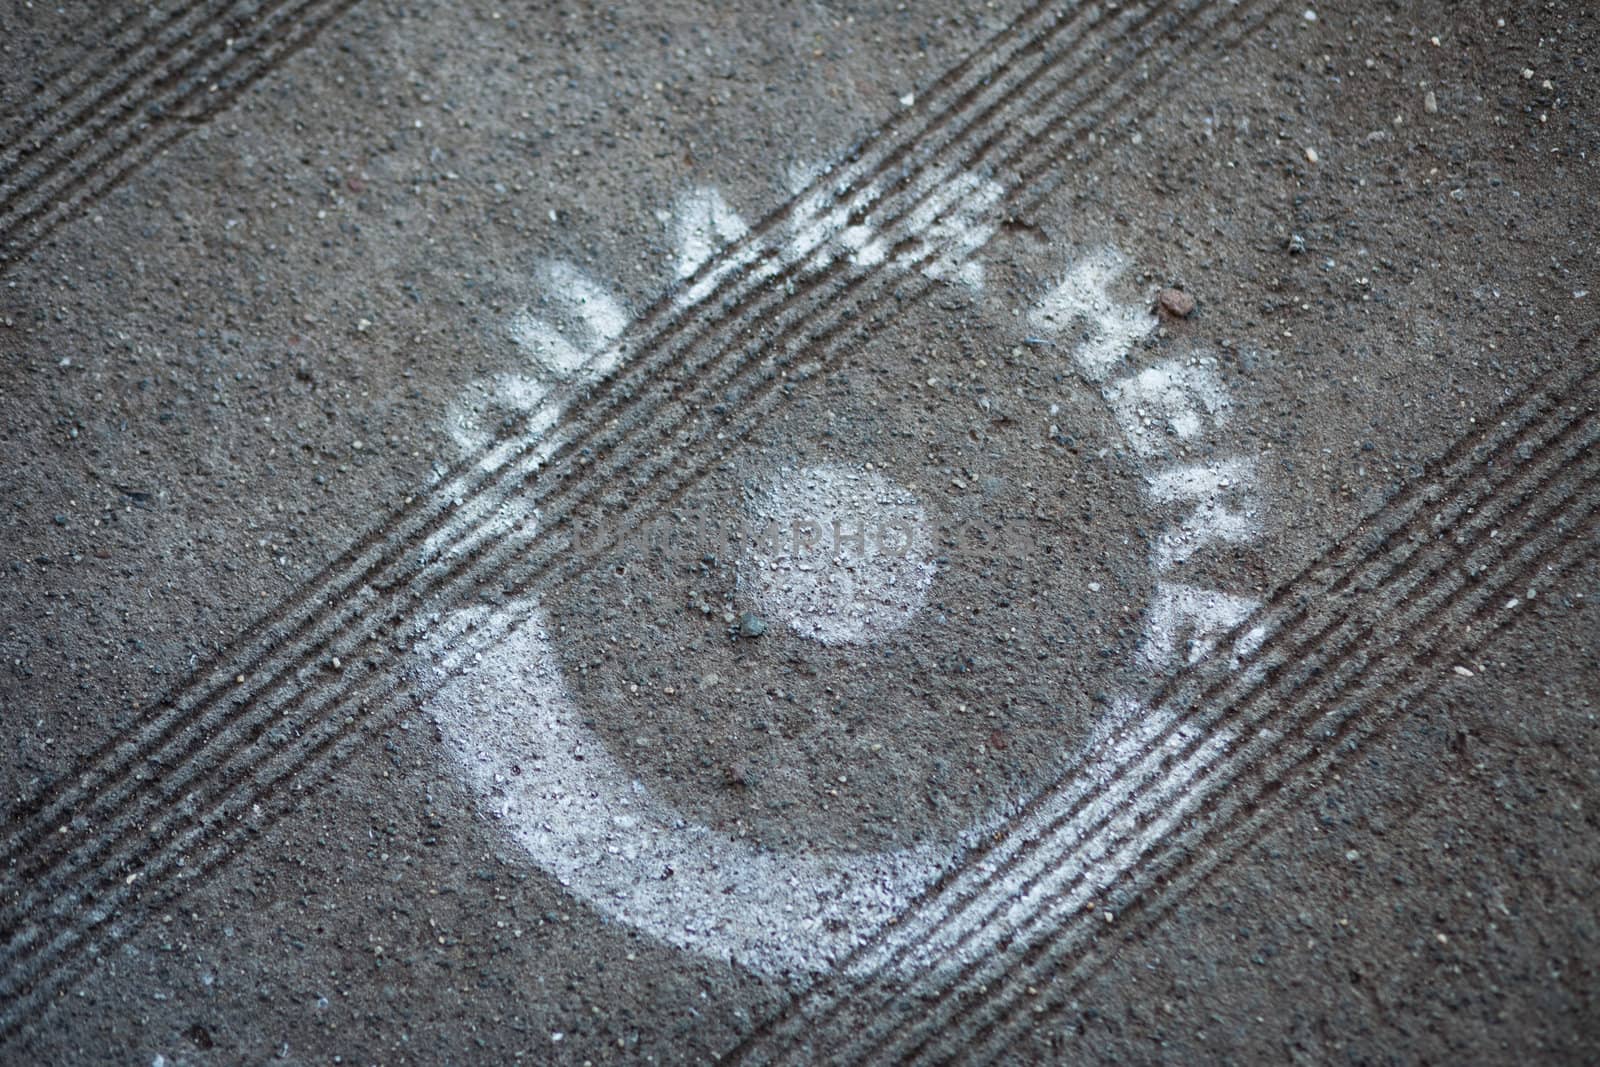 A "You Are Here" dot spray-painted on the pavement